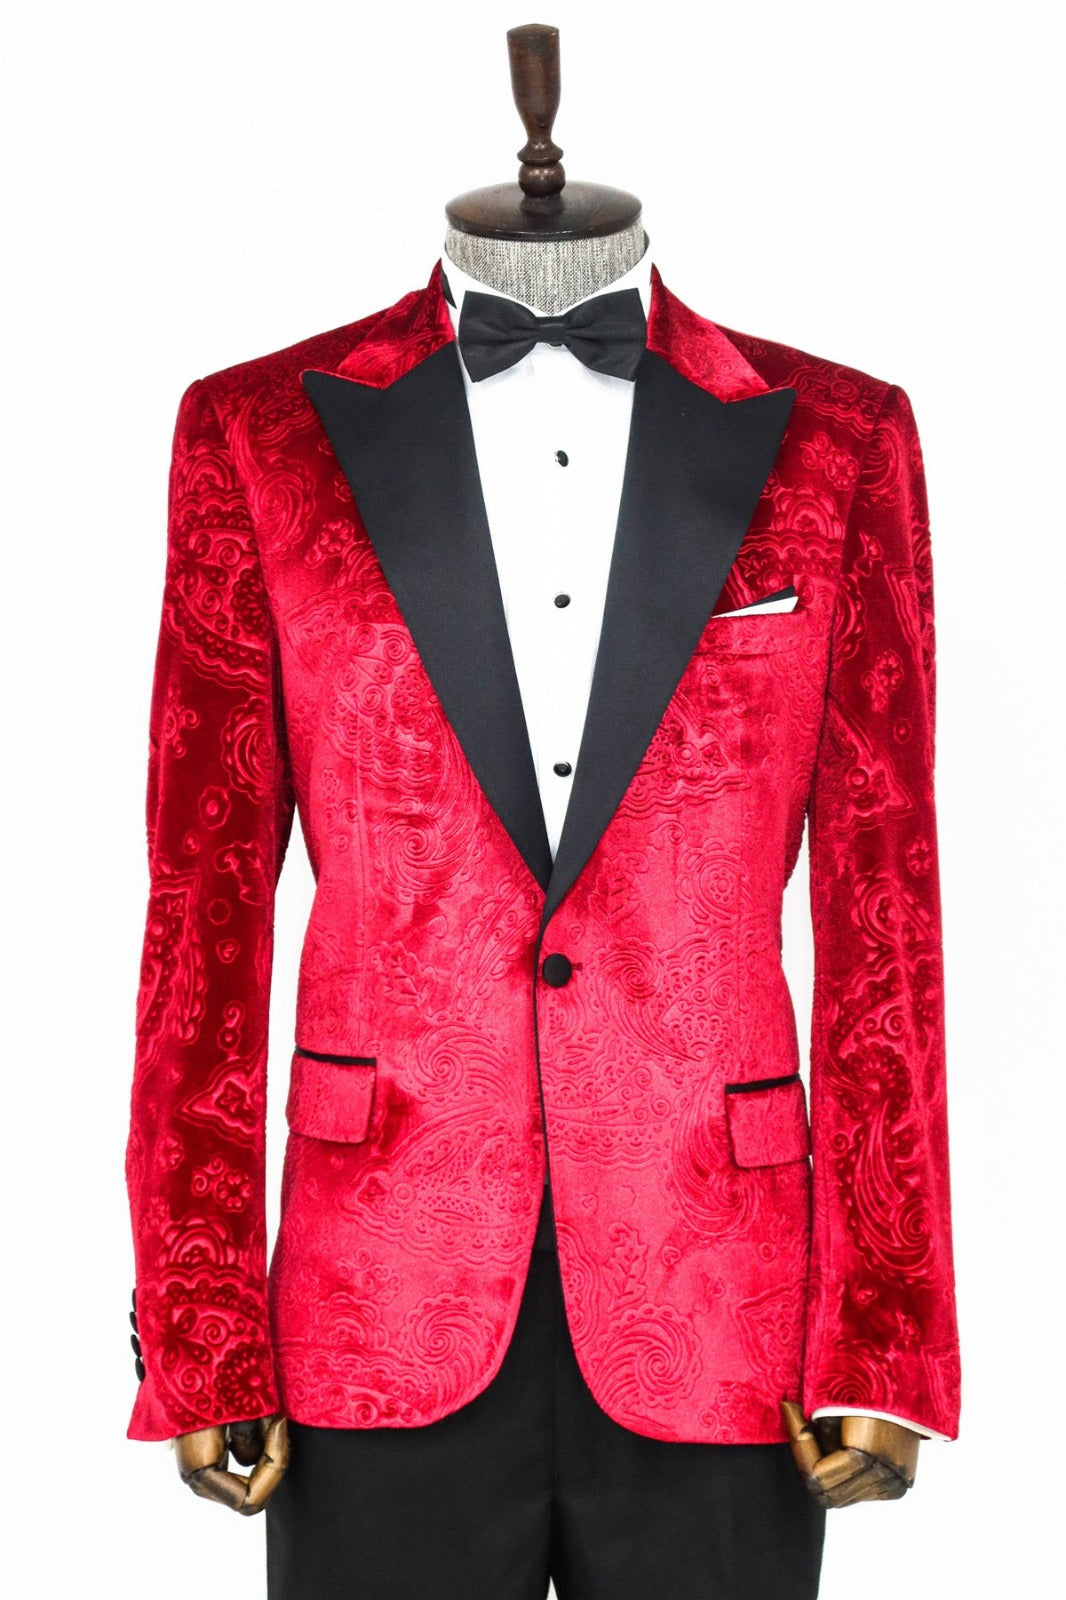 Man wearing a stylish Red Velvet Paisley Engraved Prom Blazer by KCT Menswear, showcasing elegance and sophistication in formal wear